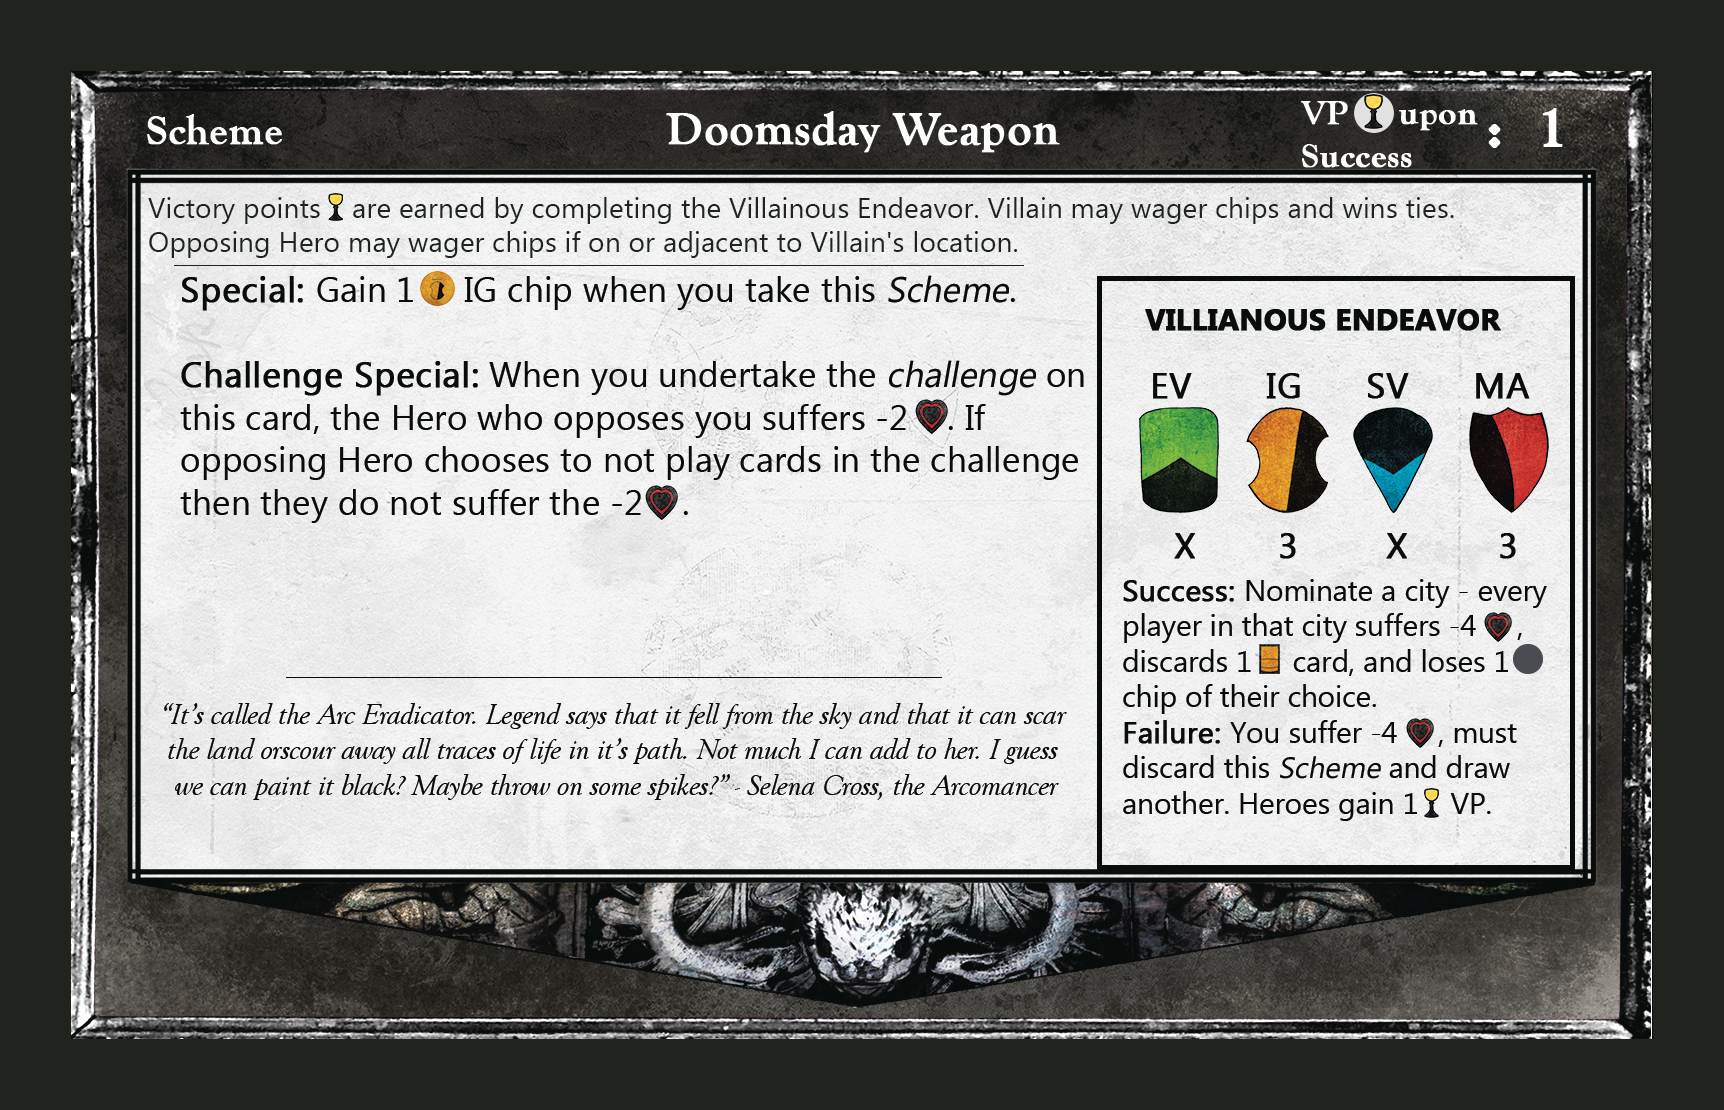 Doomsday Weapon Stats